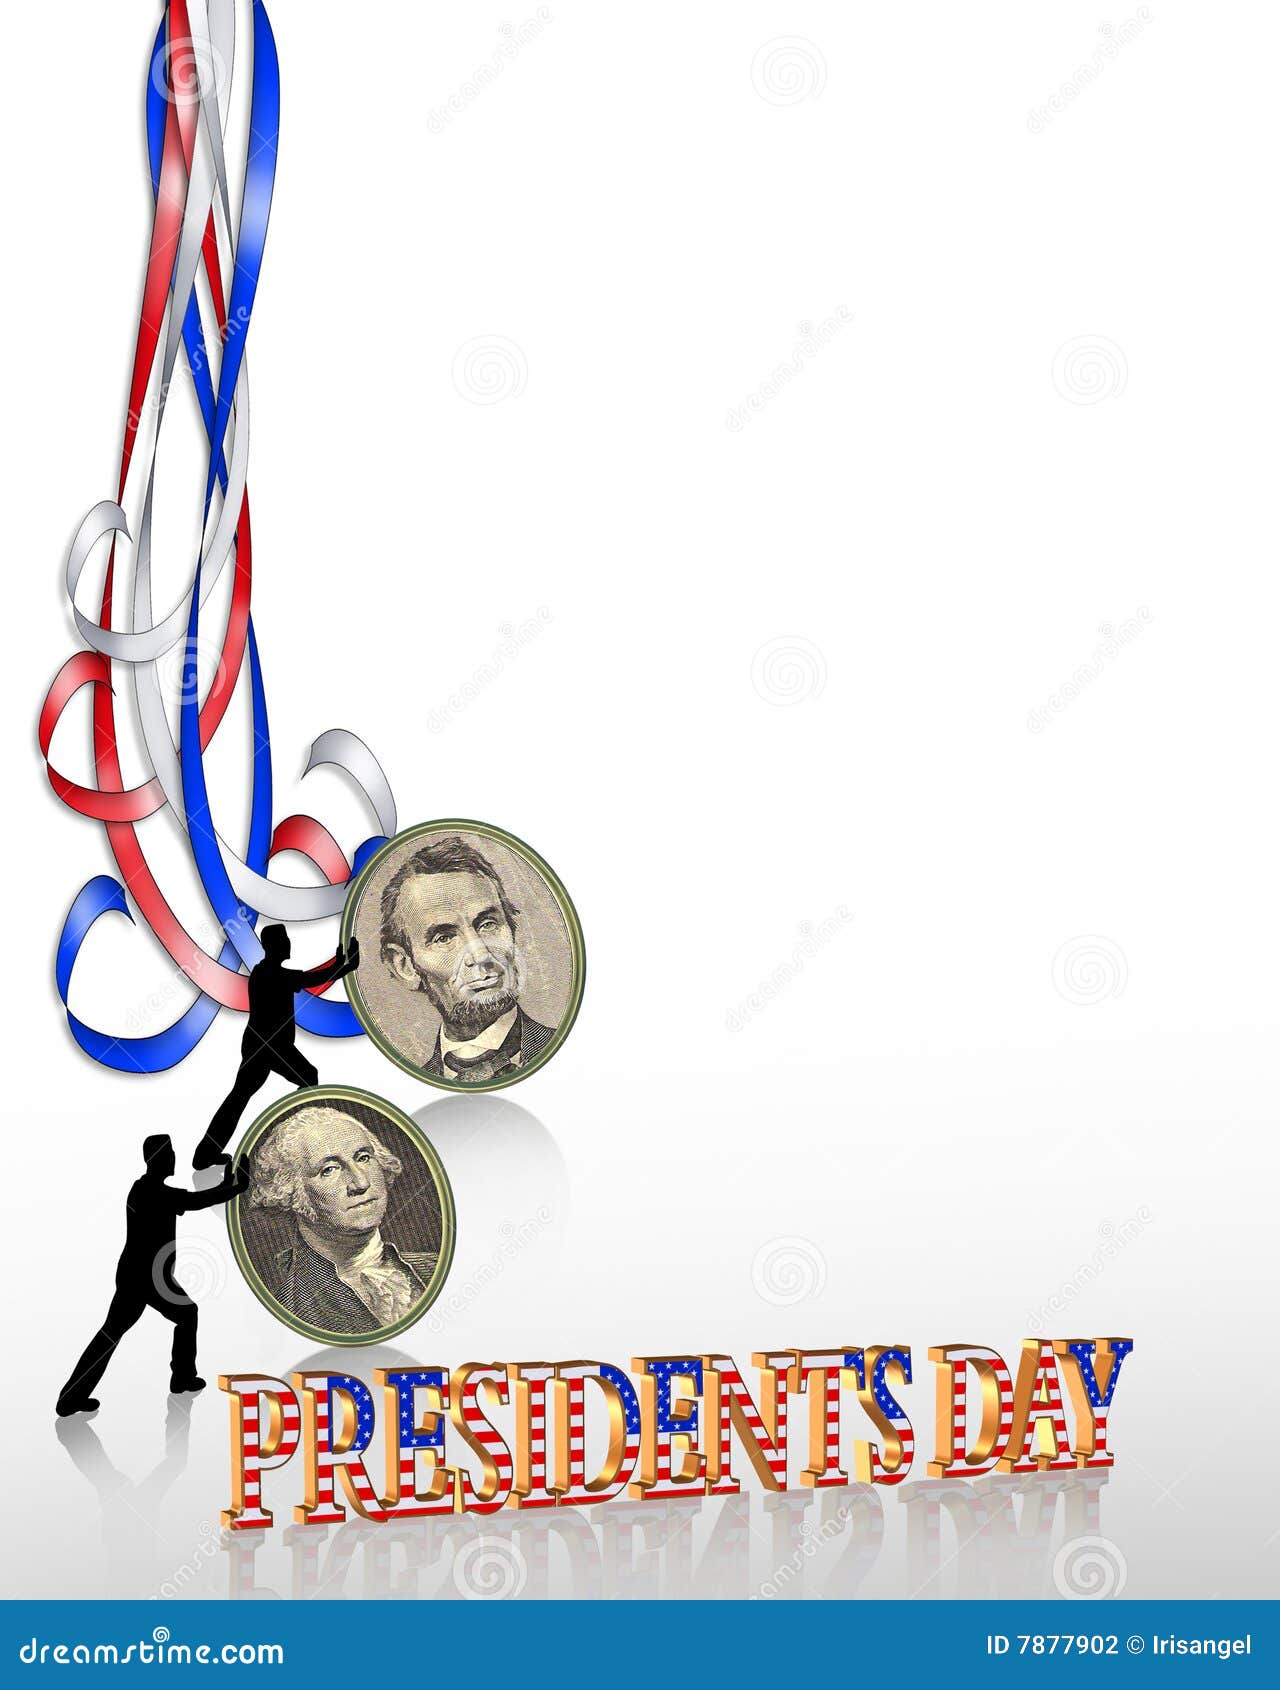 Presidents Day Border Graphic Stock Photography - Image: 78779021130 x 1300